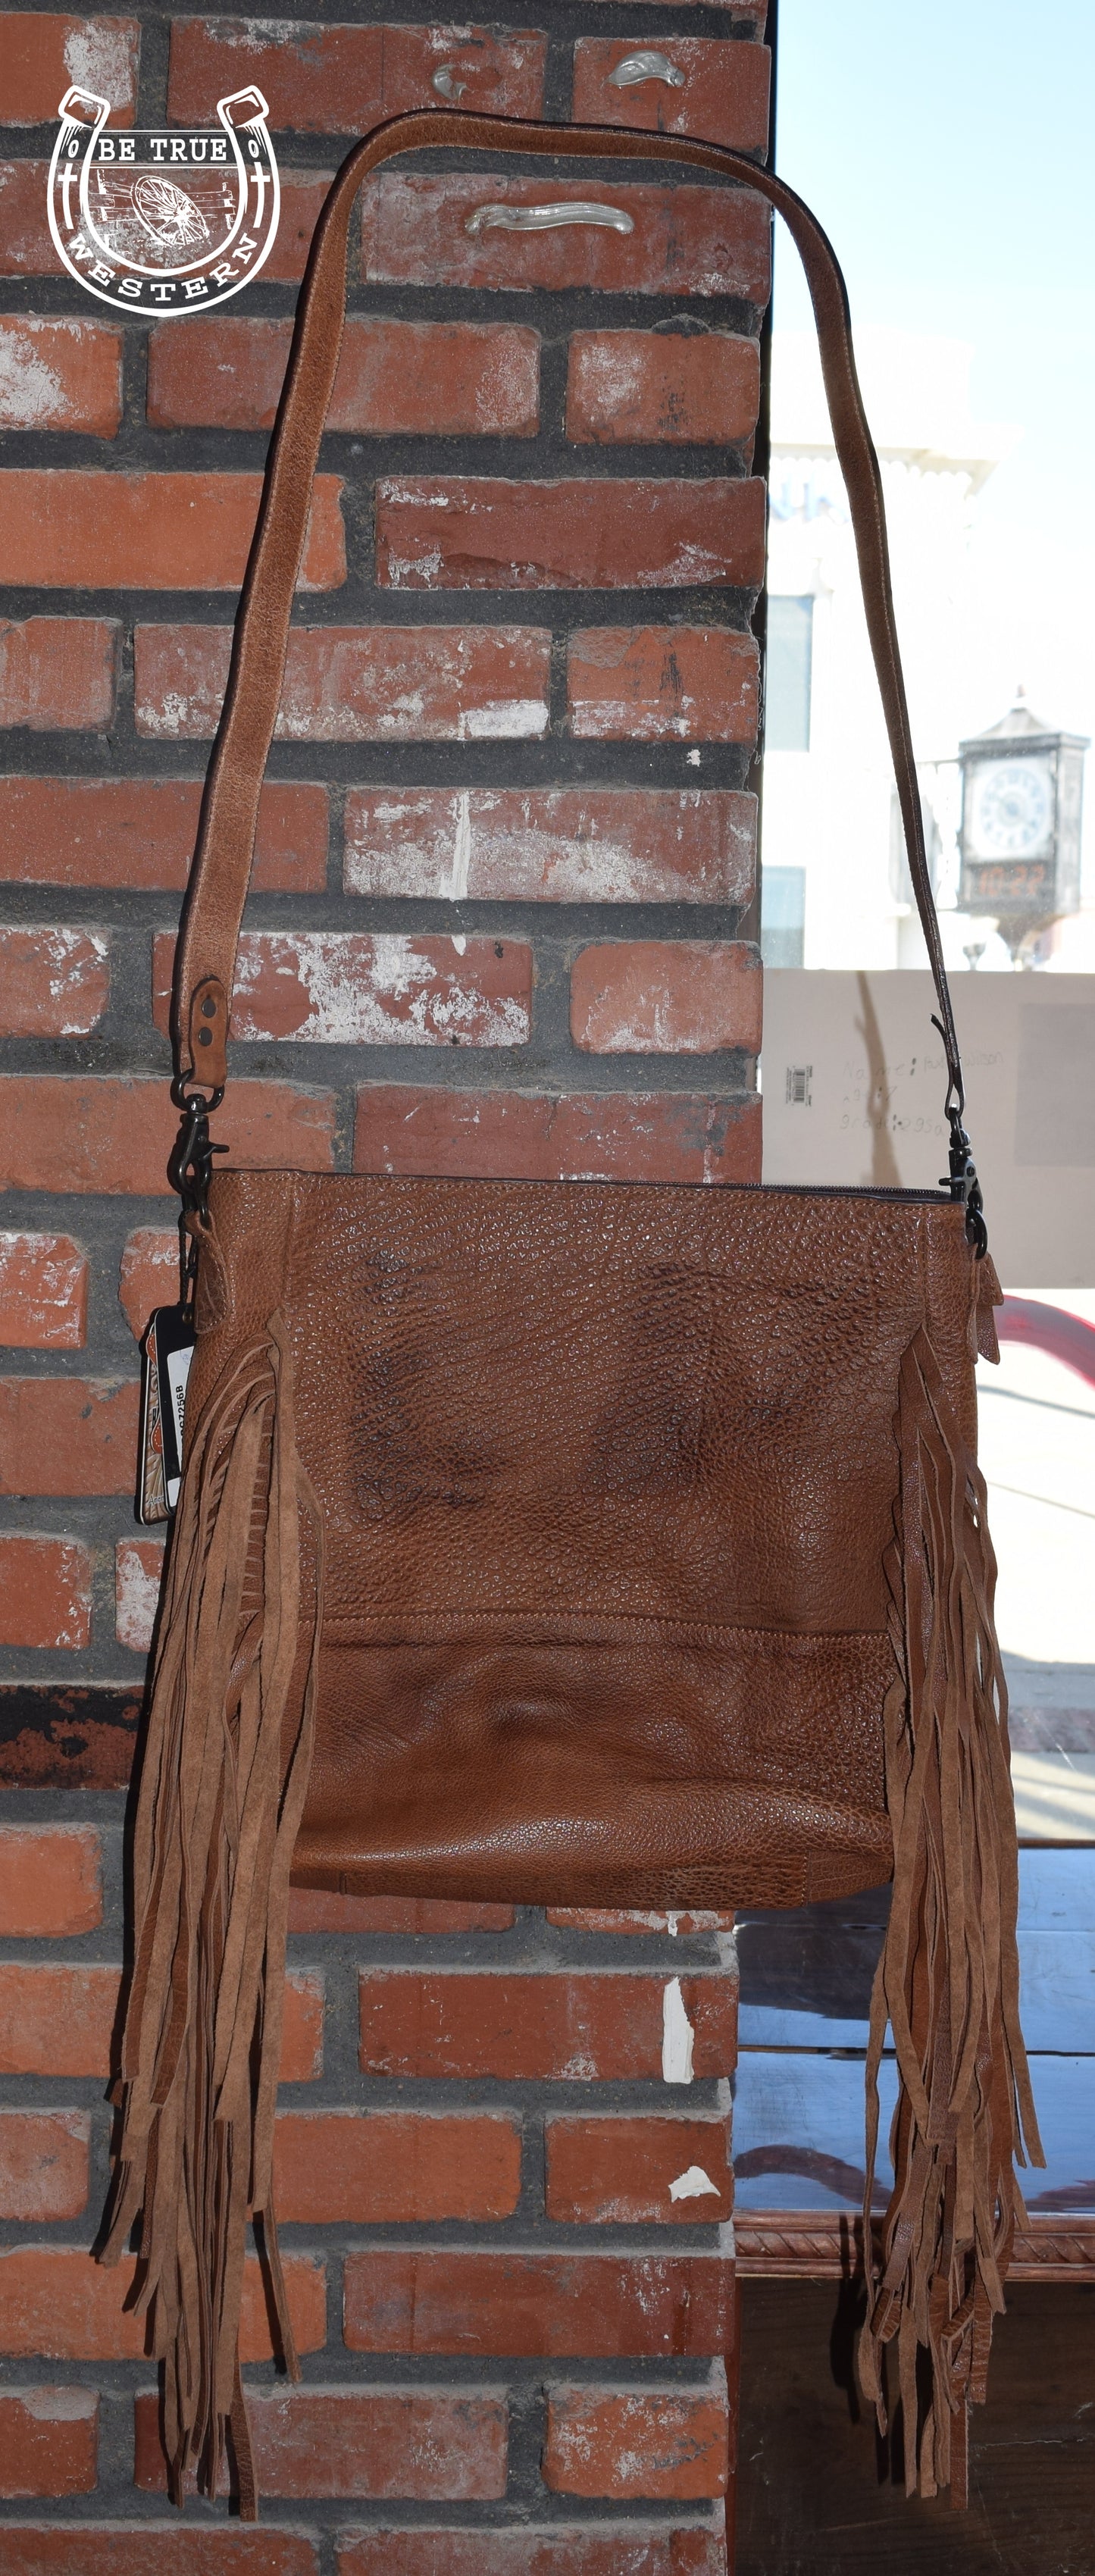 The Plain Jane Concealed Carry Purse